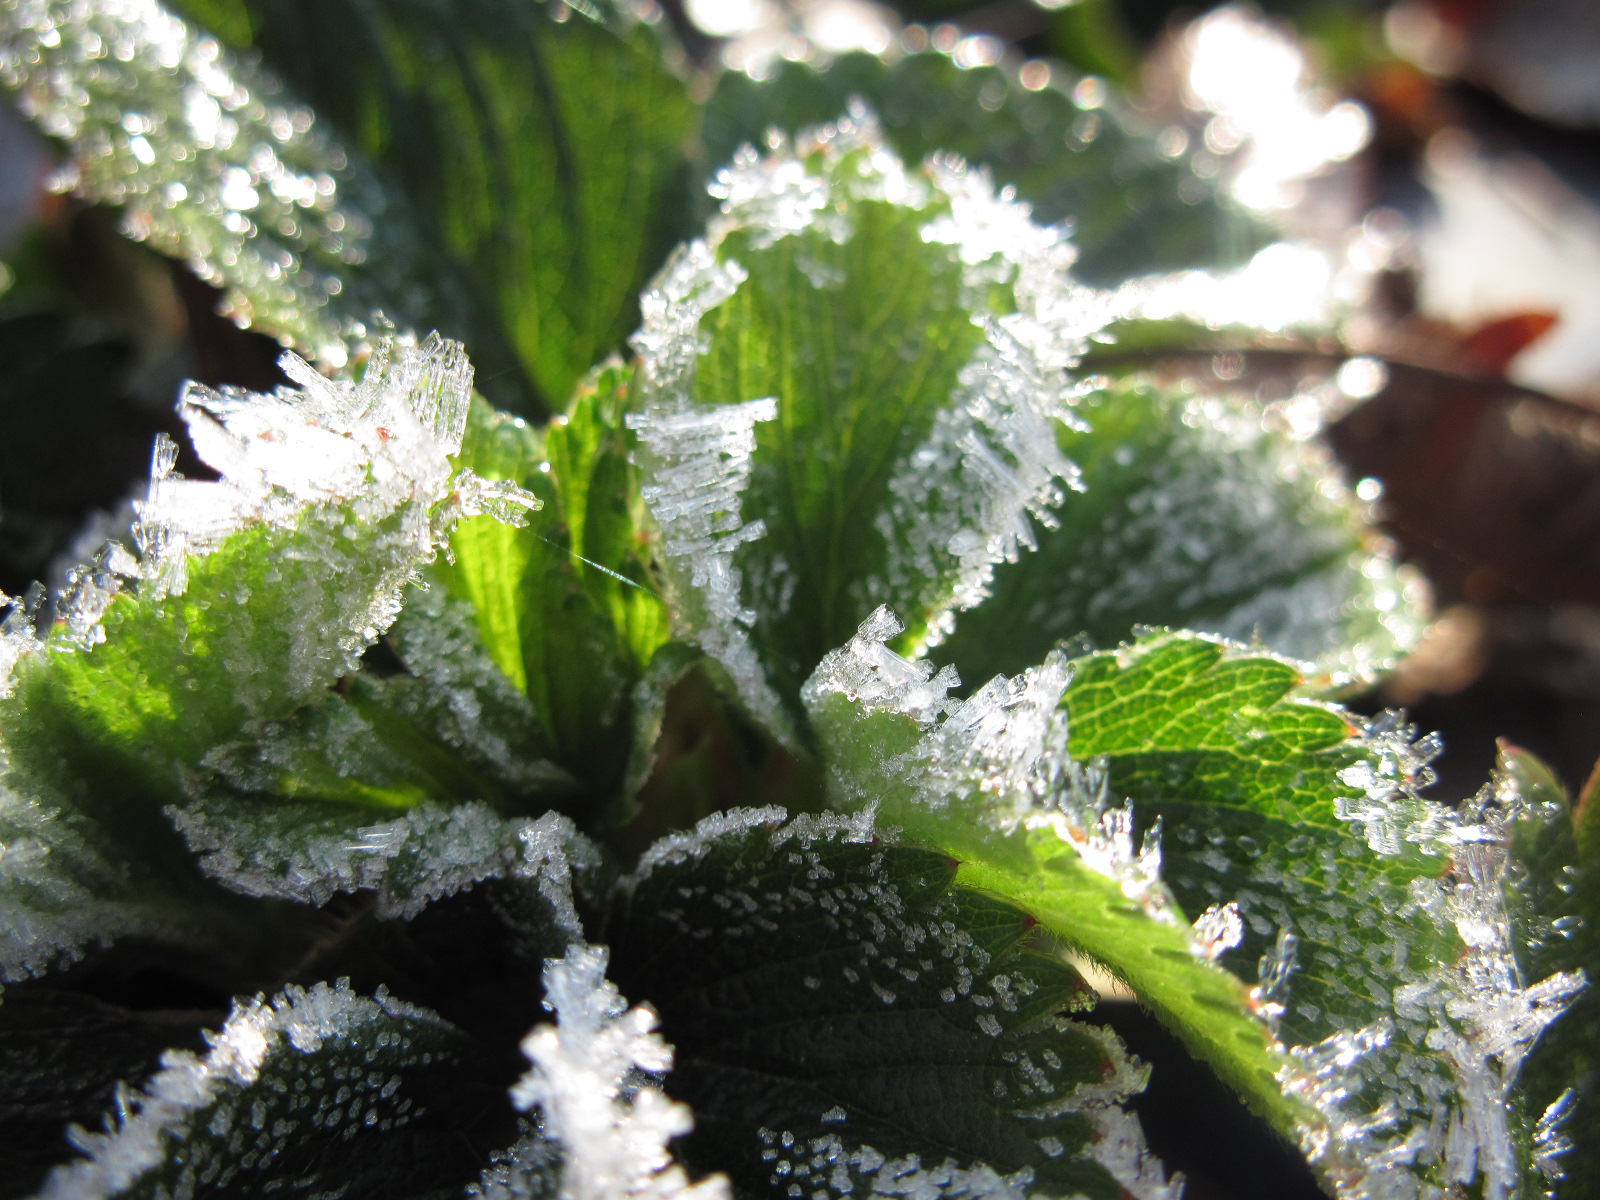 Frost on strawberry leaves can cause cold injury